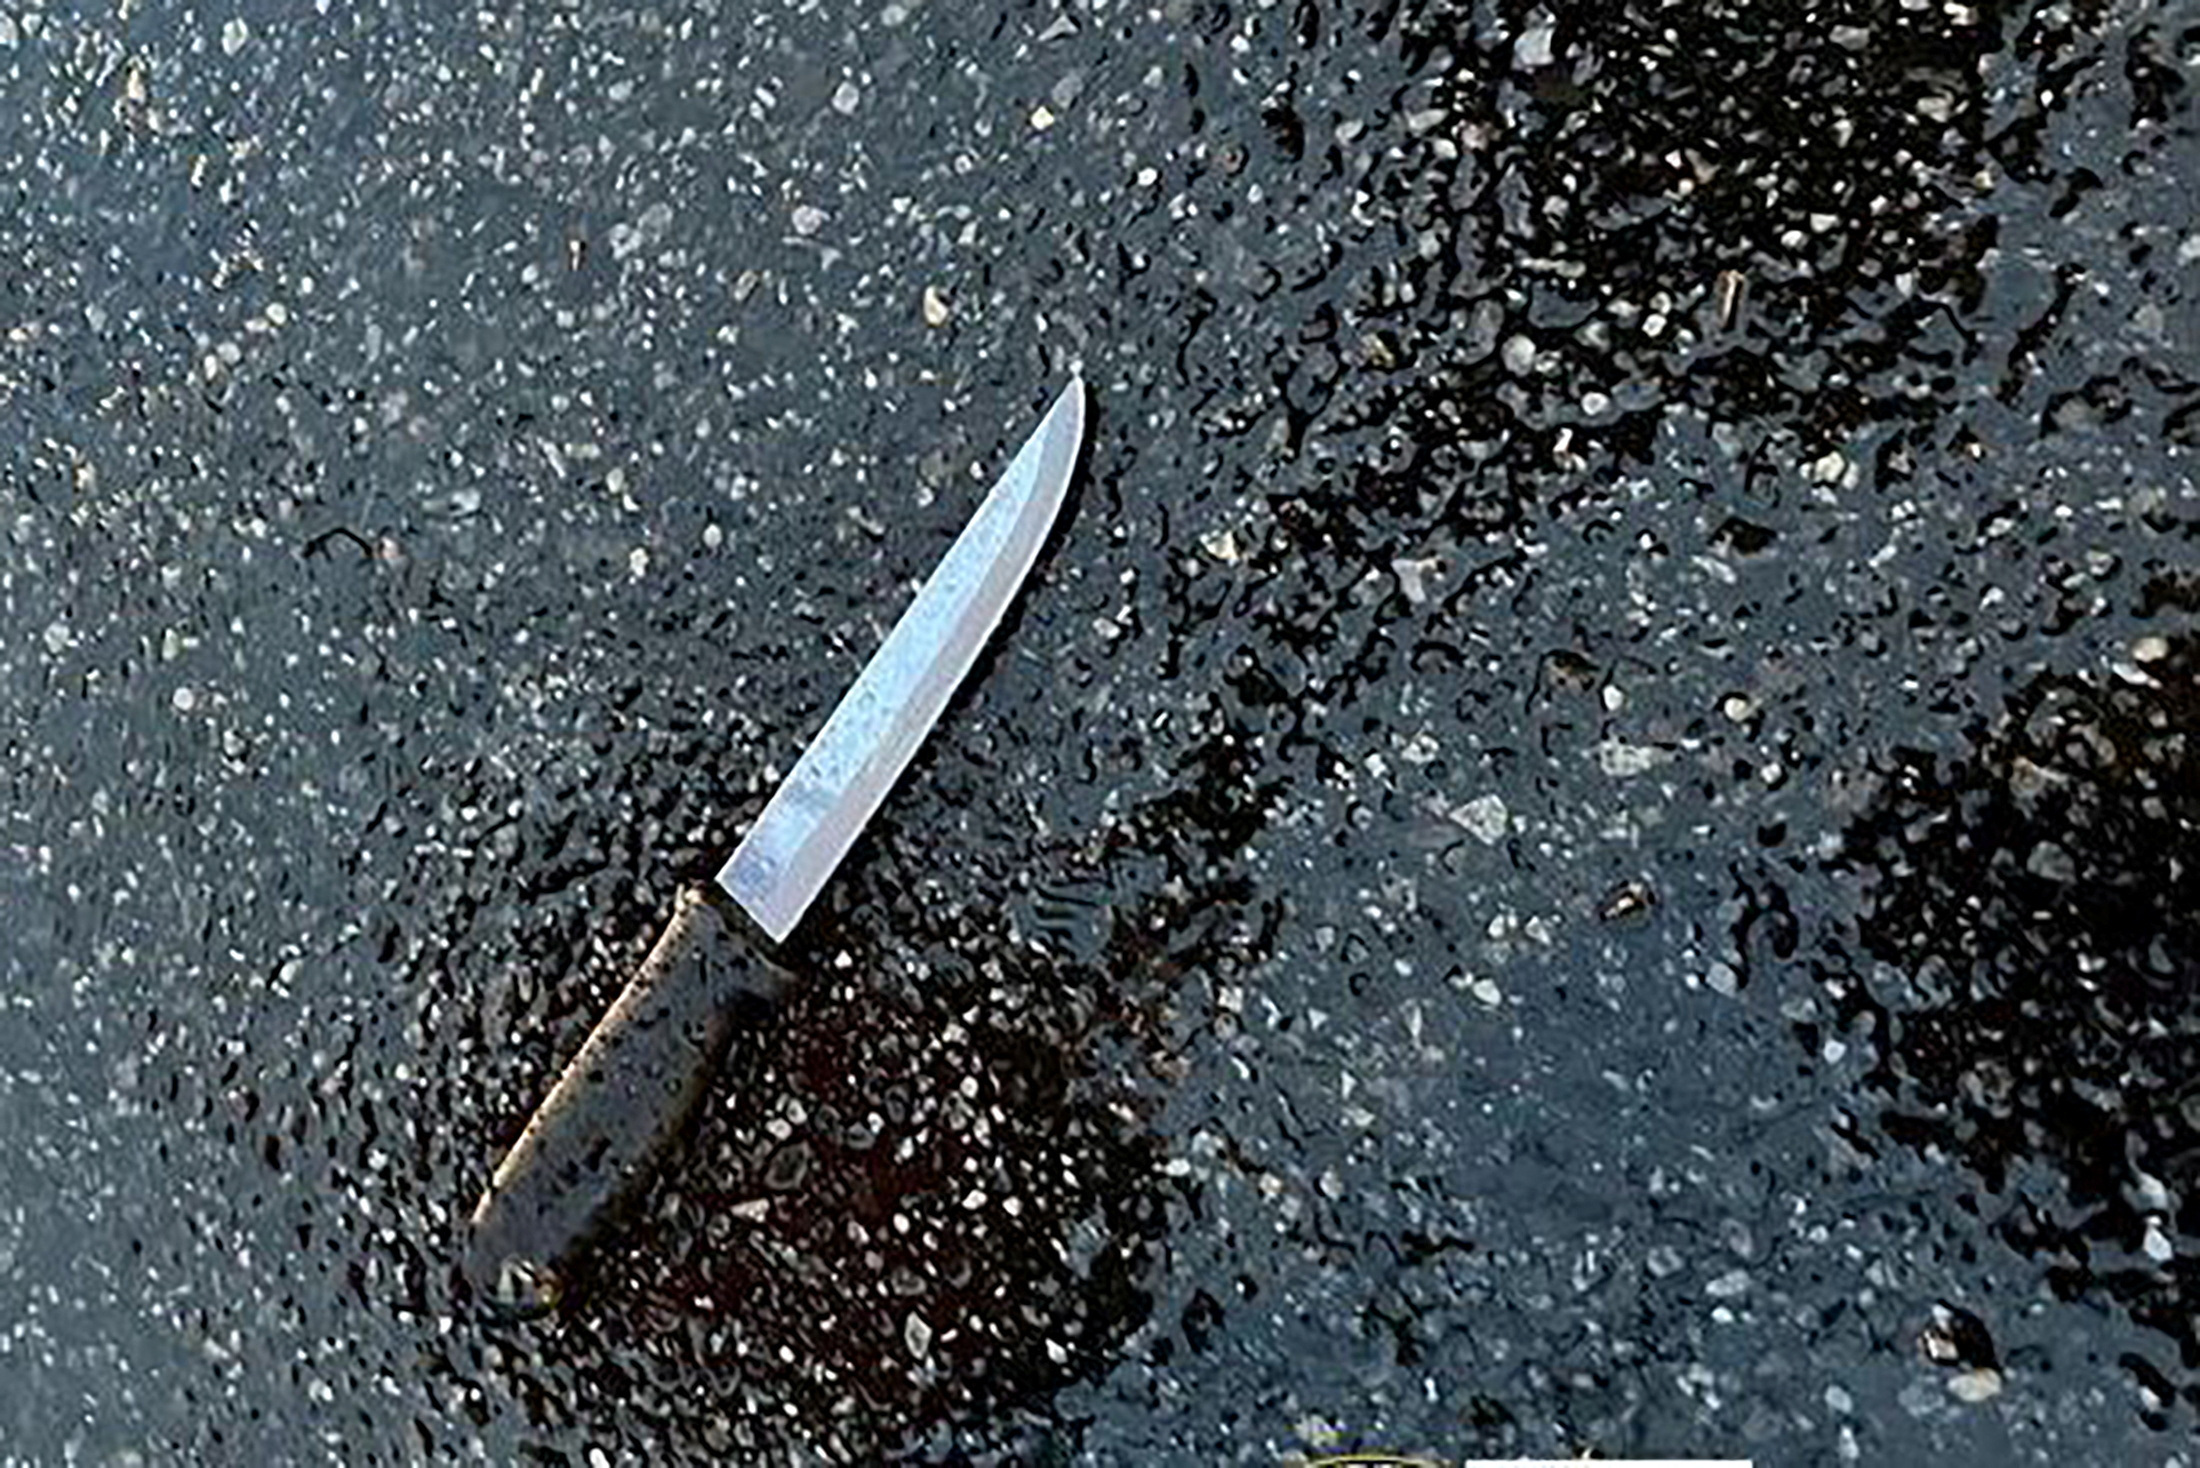 Knife found at the scene after a man, who was later shot dead by police, killed four members of his extended family in Queens